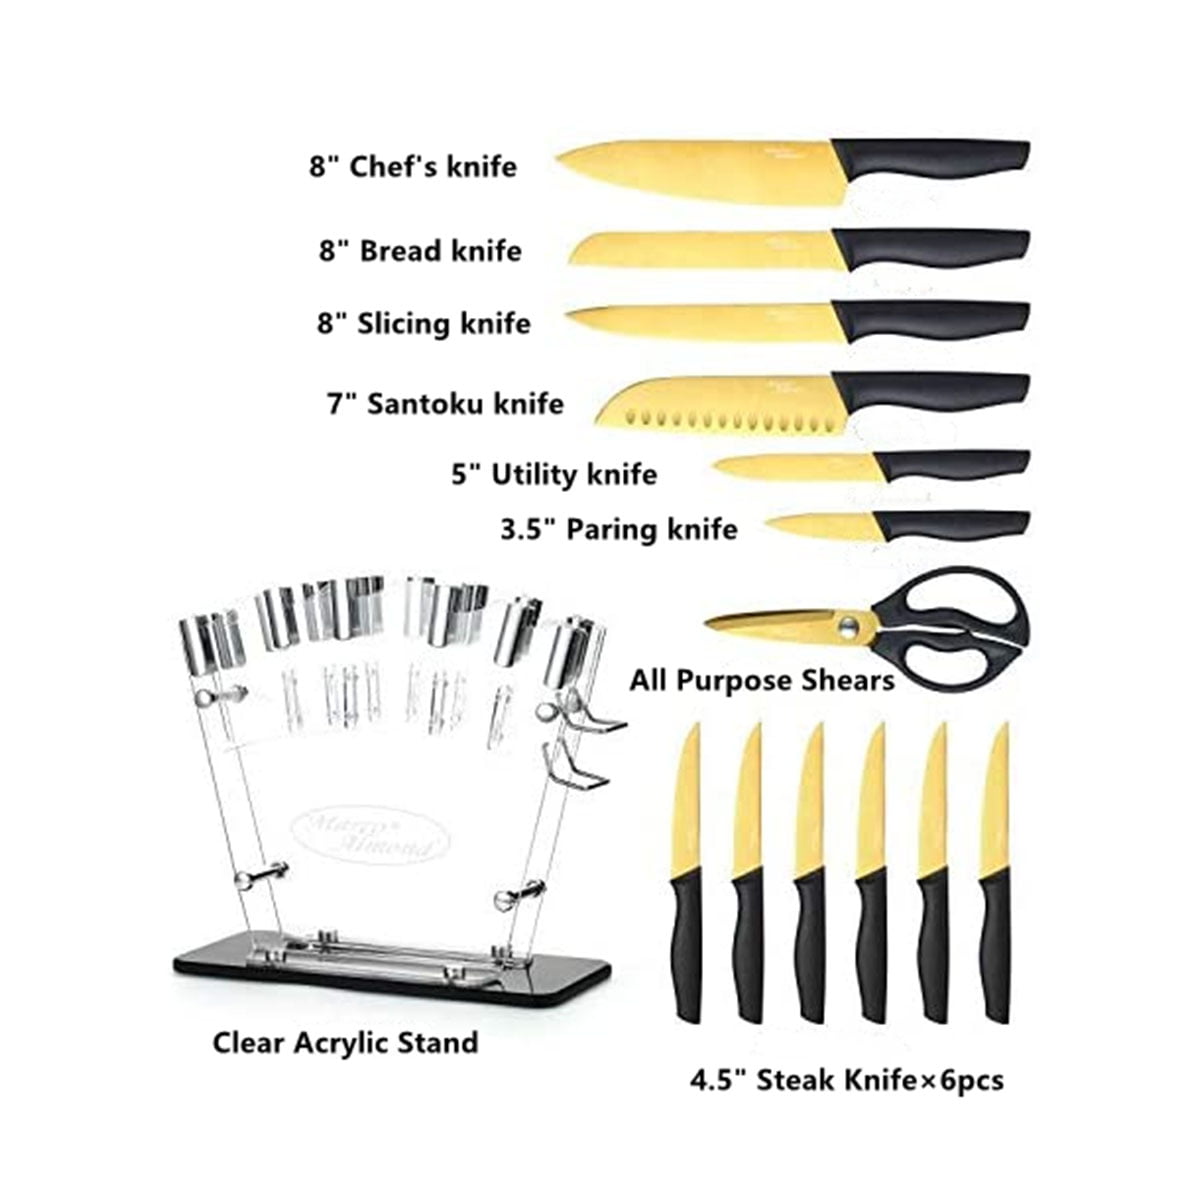 Marco Almond® Gold Knife Set With Block KYA23, 14 Pieces Stainless